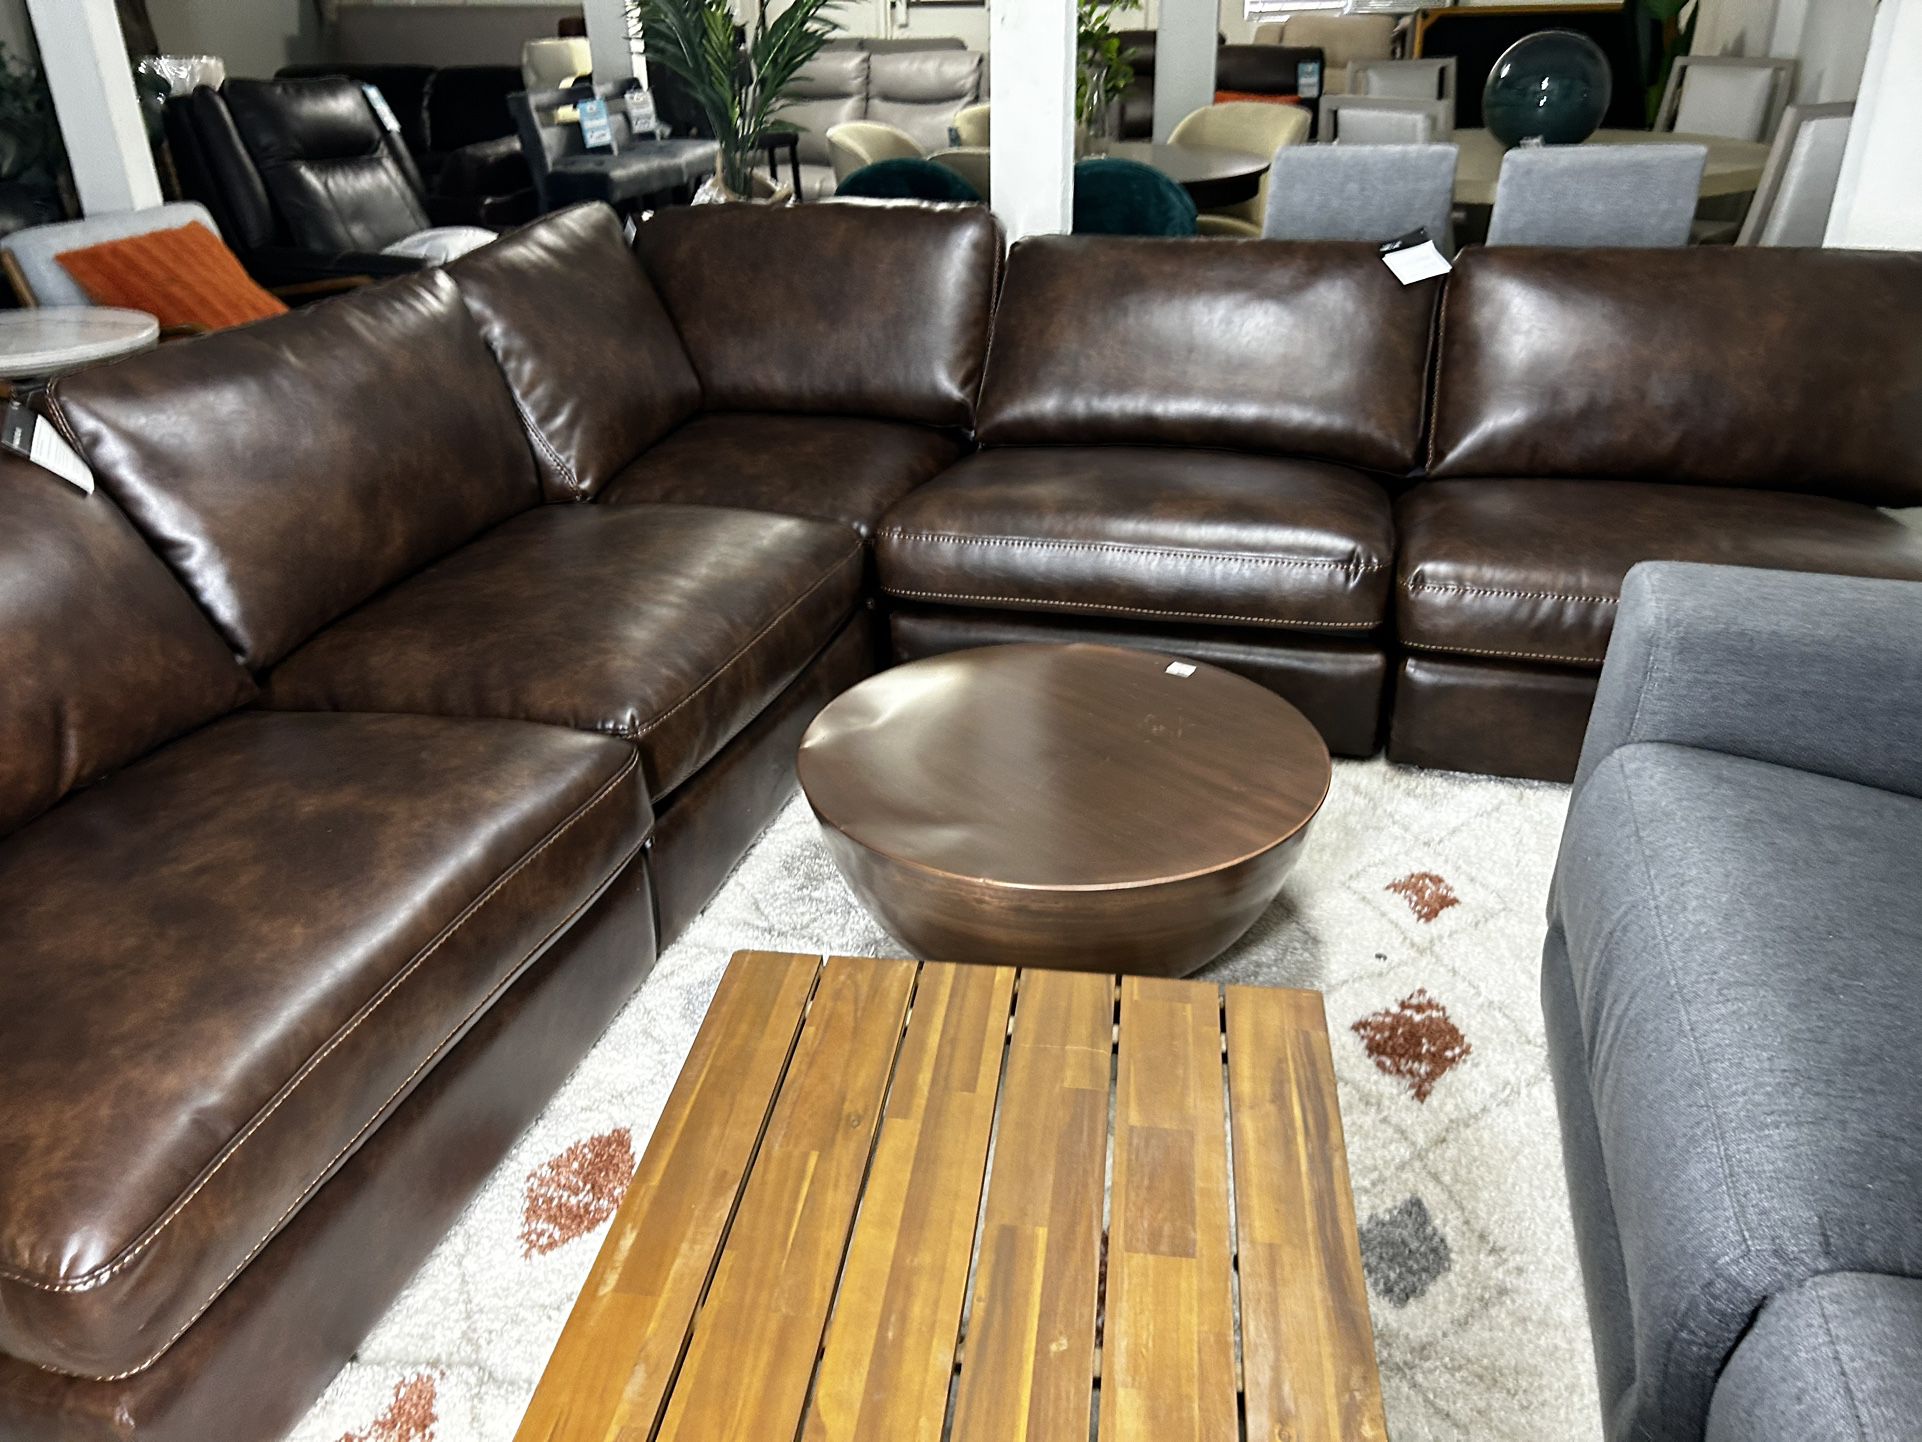 Madilex 5 Pc Beyond Leather Sectional 